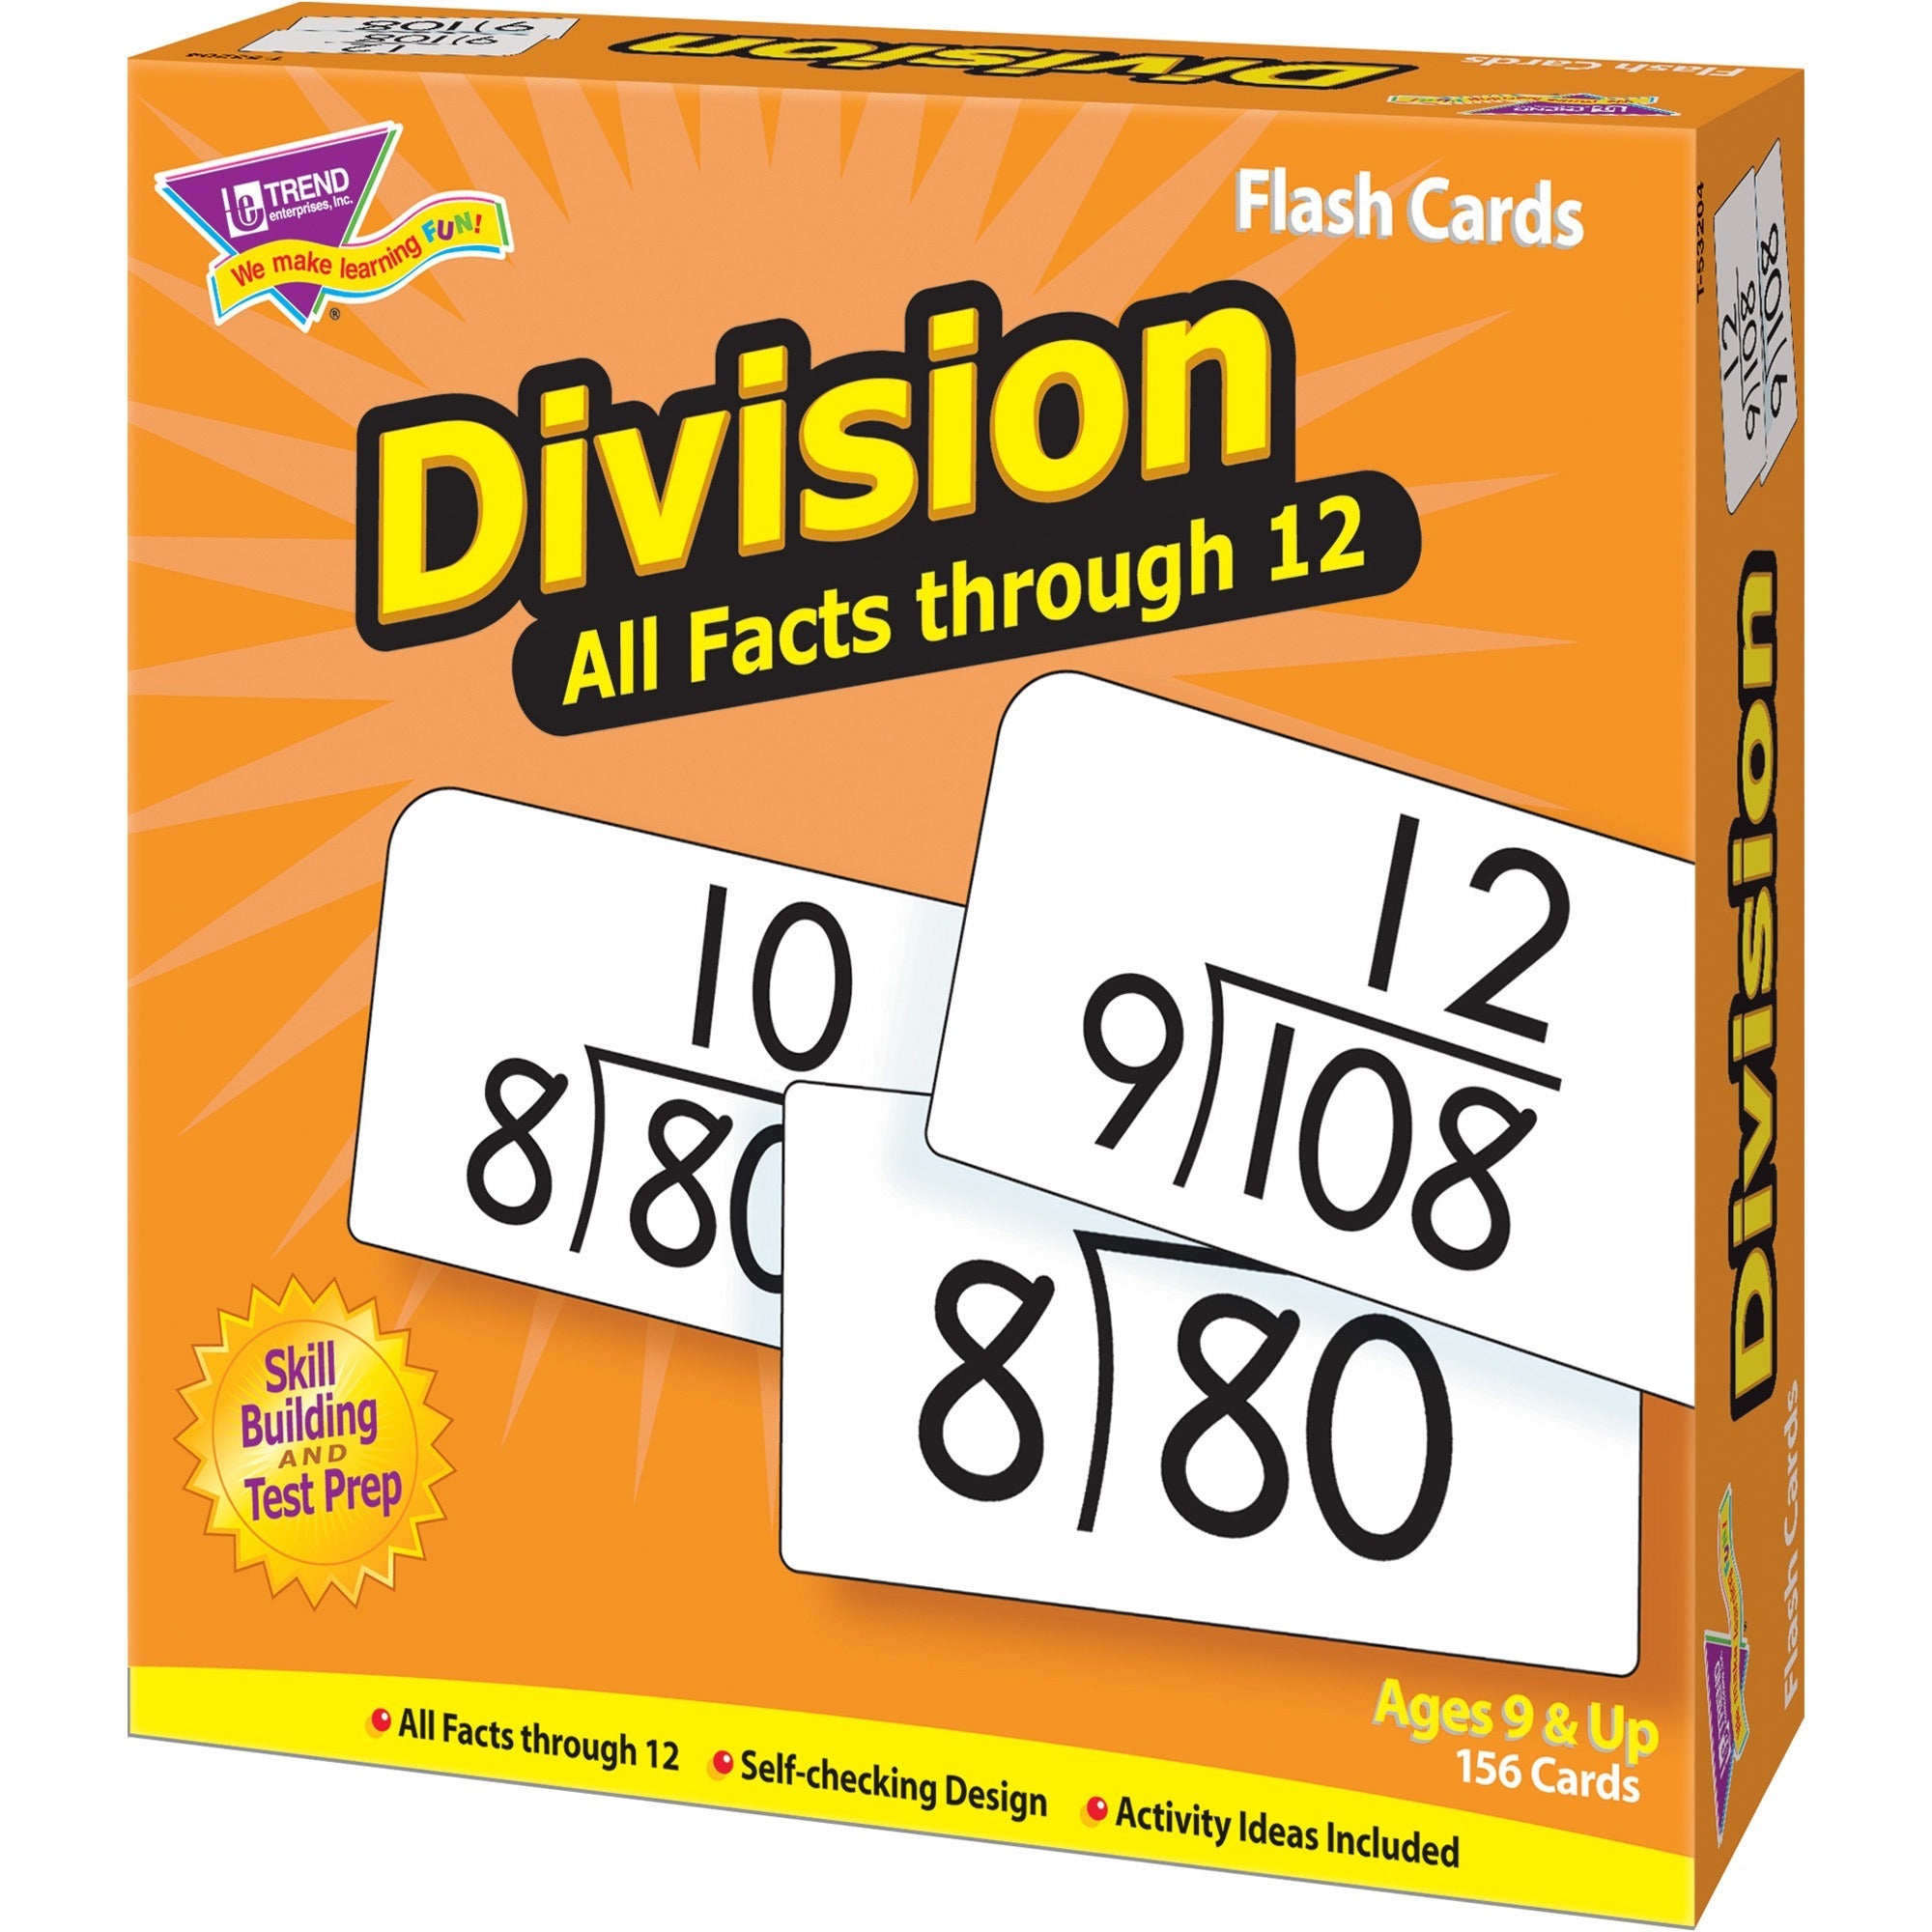 trend-division-all-facts-through-12-flash-cards-theme-subject-learning-skill-learning-division-156-pieces-9+-156-box_tep53204 - 3